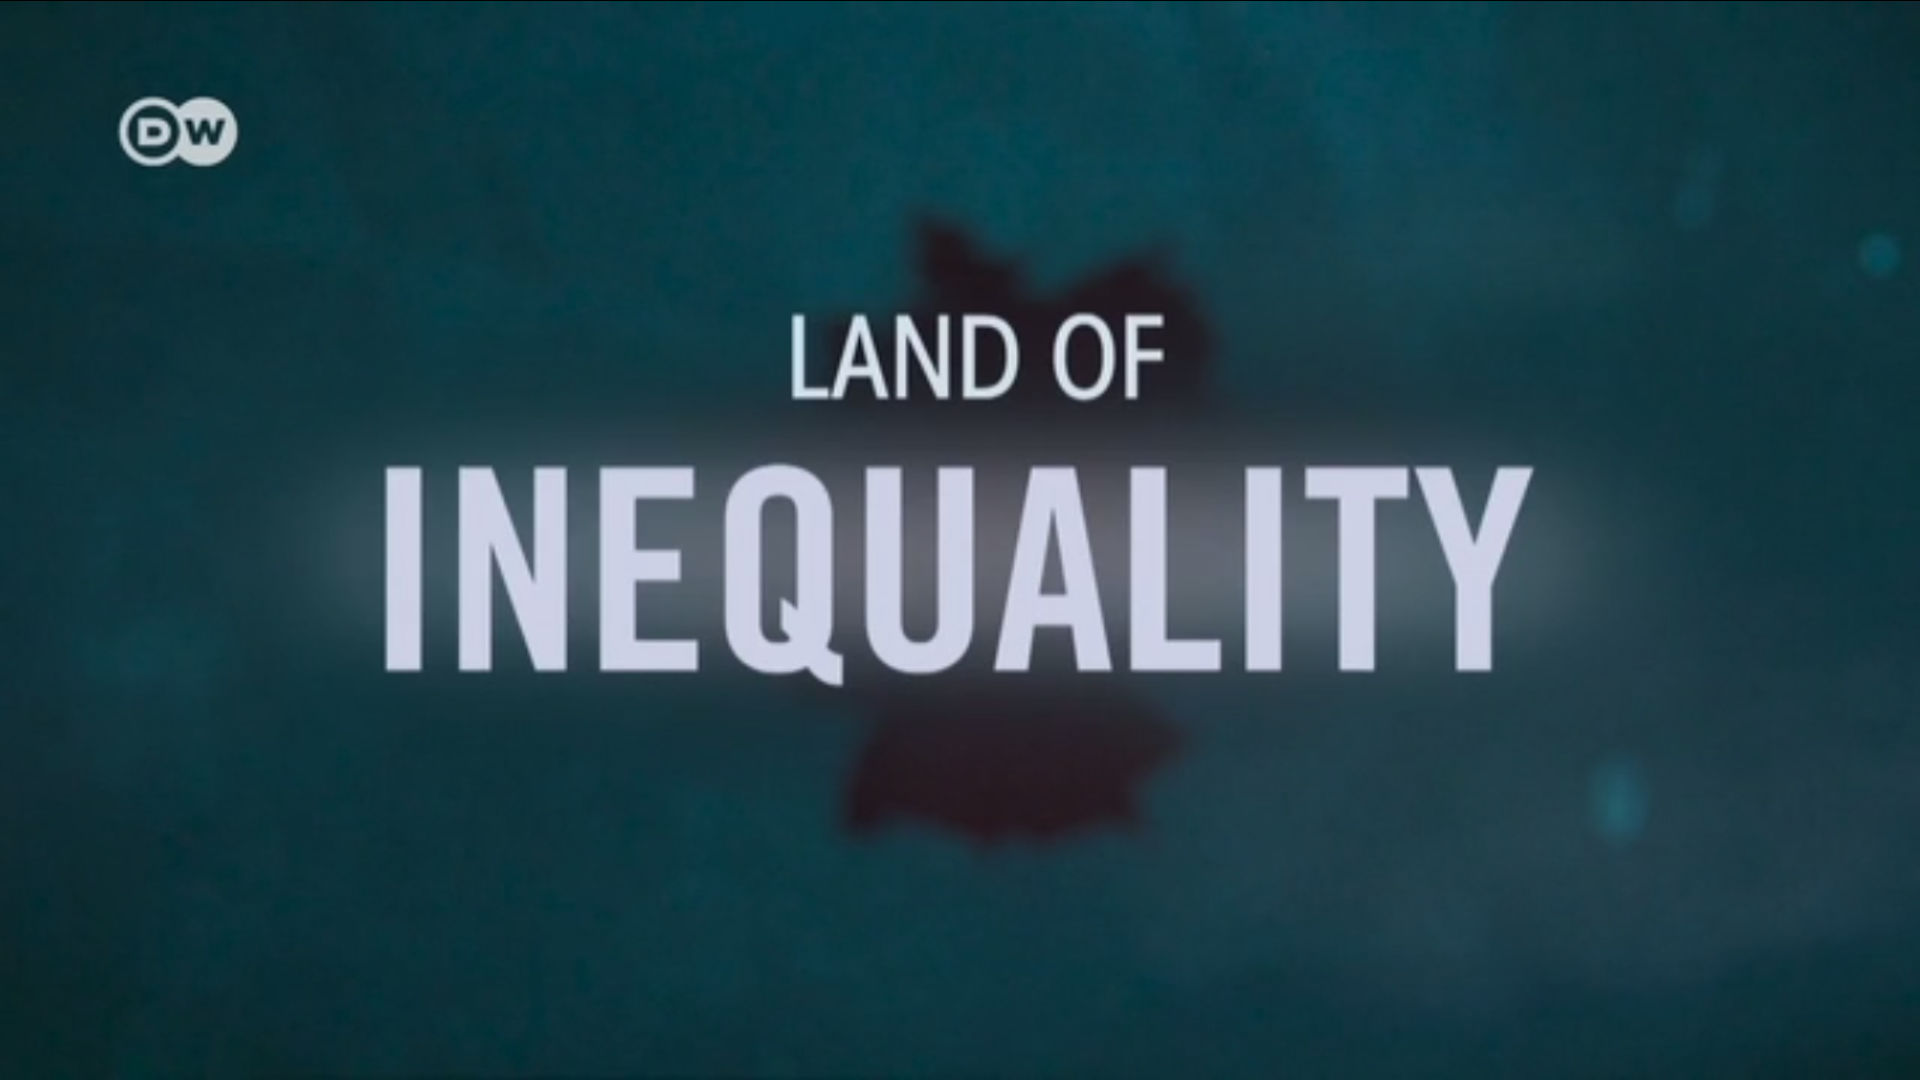 Watch Full Movie - Inequality - How Wealth Becomes Power